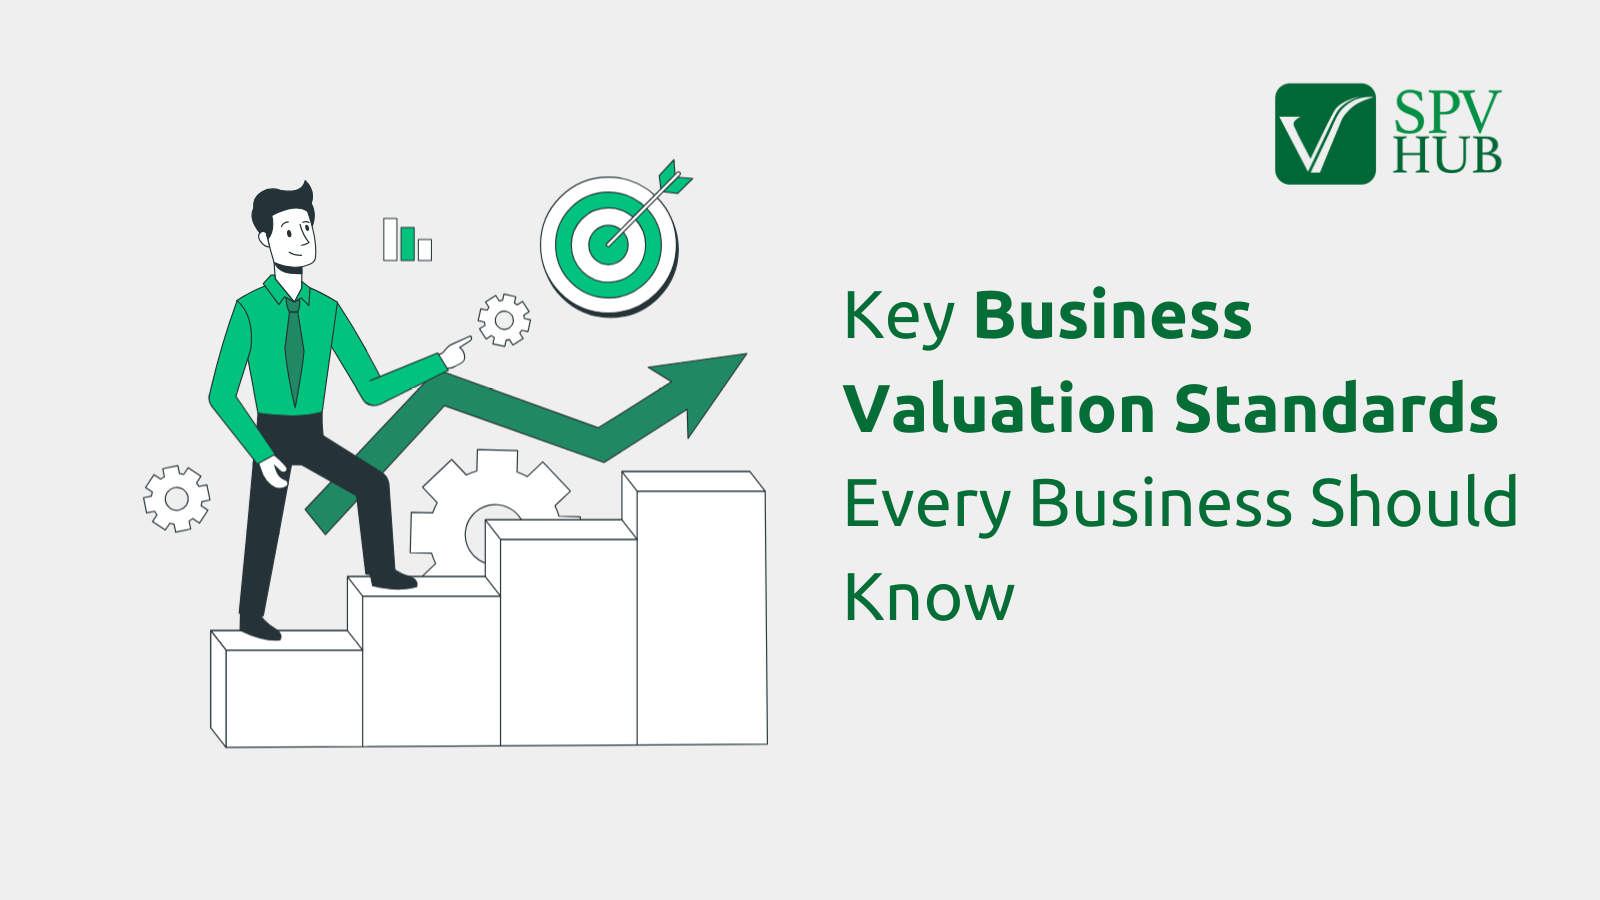 Key Business Valuation Standards Every Business Should Know